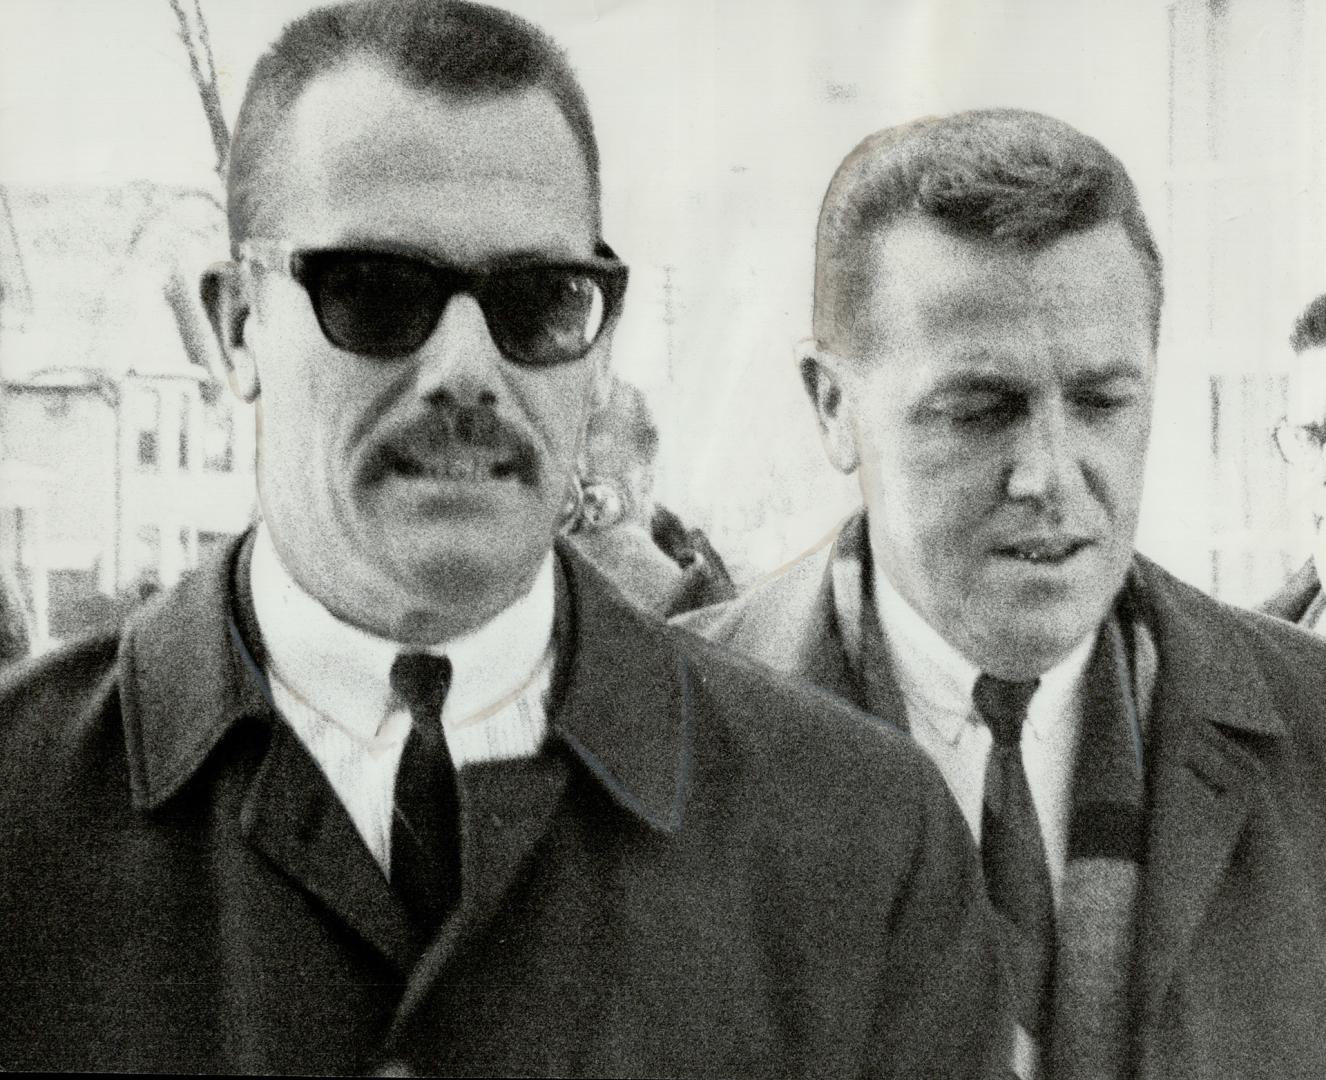 Peter Lott (left) is led into the police staff house on Charles St